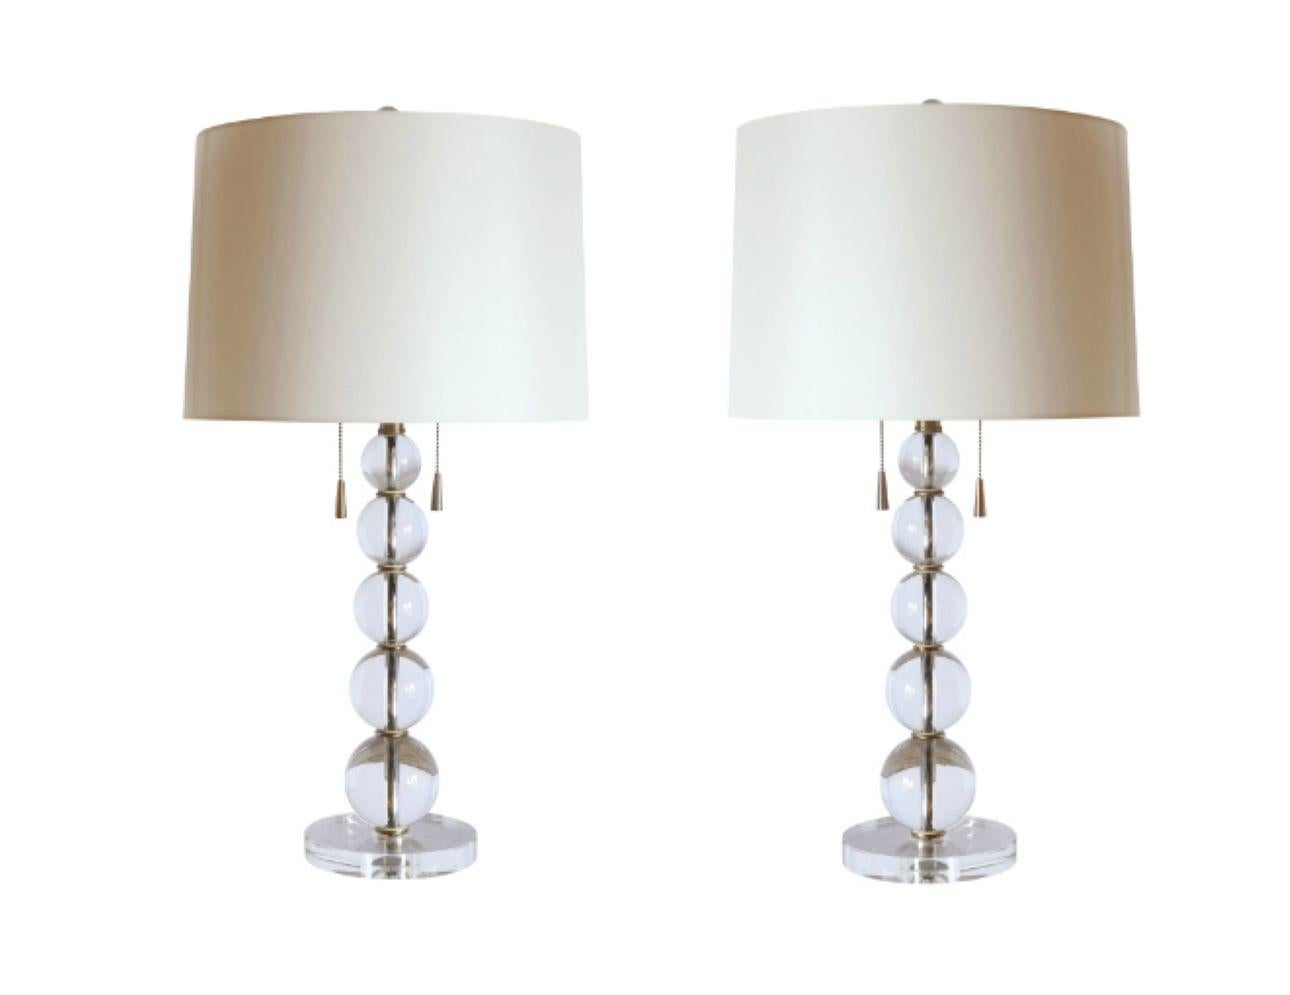 Pair of mid century glass bubble lamps extremely well constructed and sturdy. Comes with shades and finials. Two lighting sockets on each lamp with chain pulls.